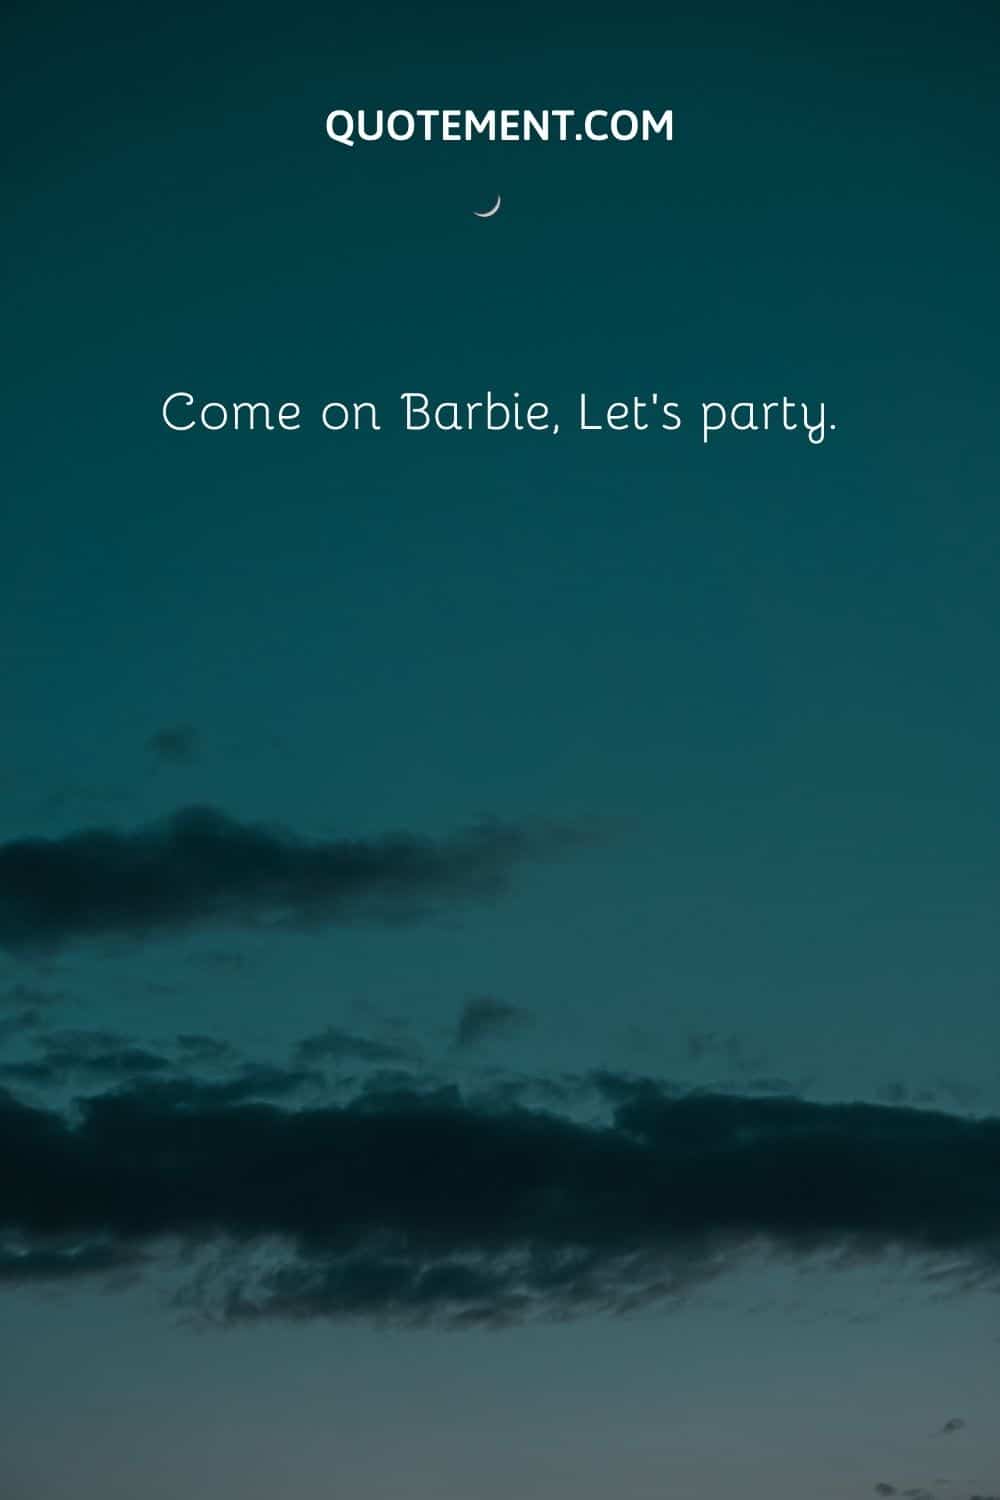 Come on Barbie, Let’s party